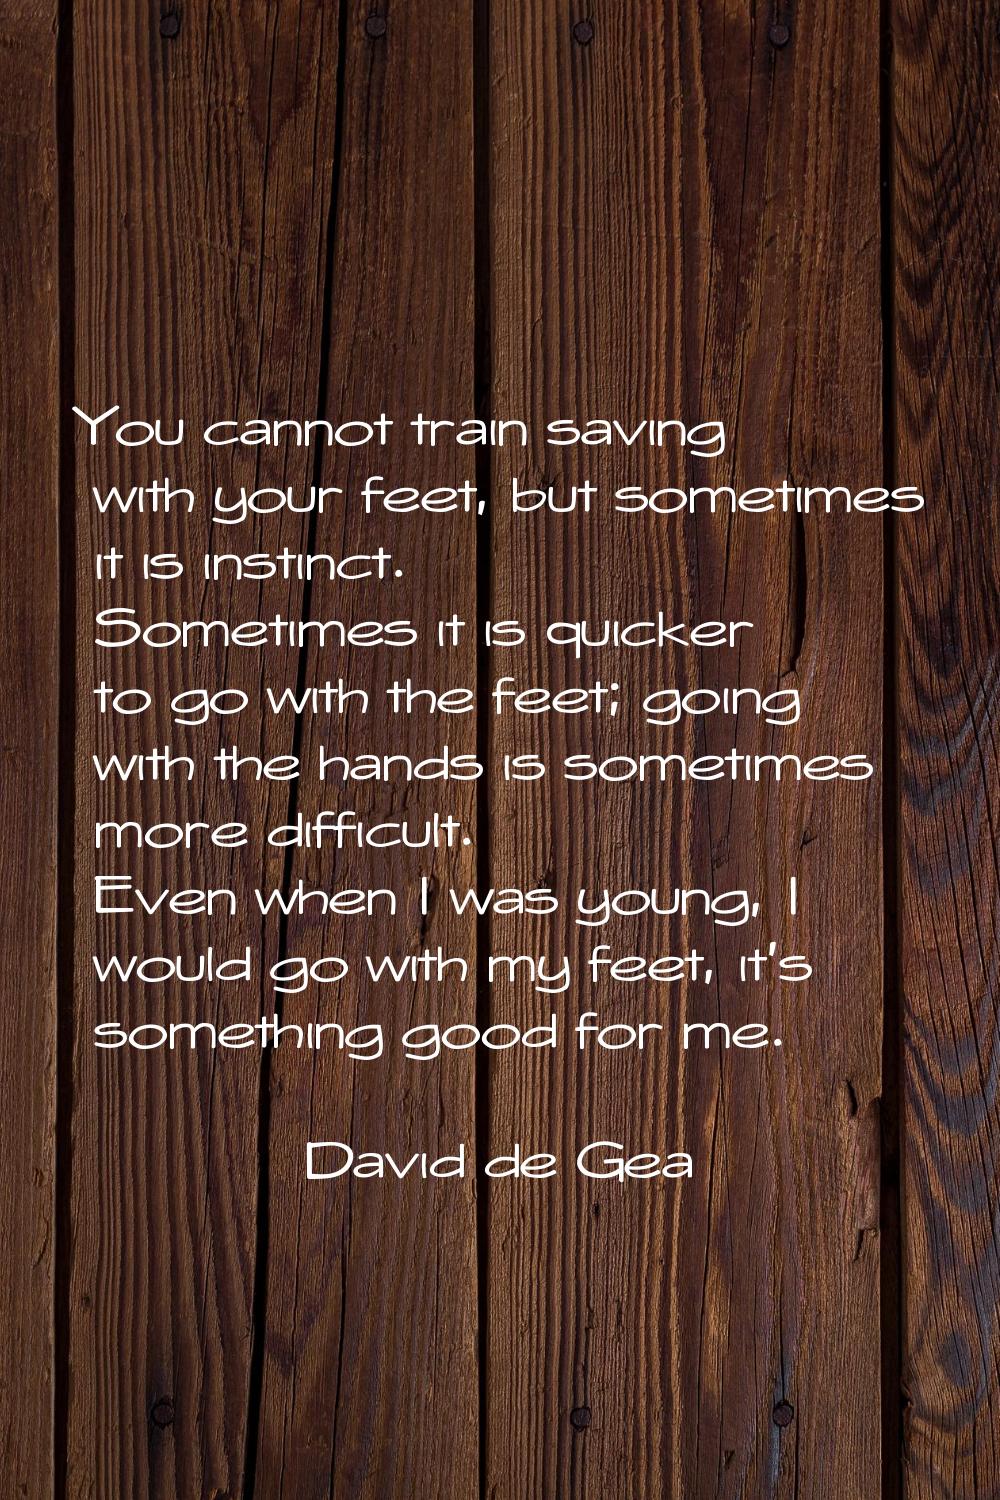 You cannot train saving with your feet, but sometimes it is instinct. Sometimes it is quicker to go